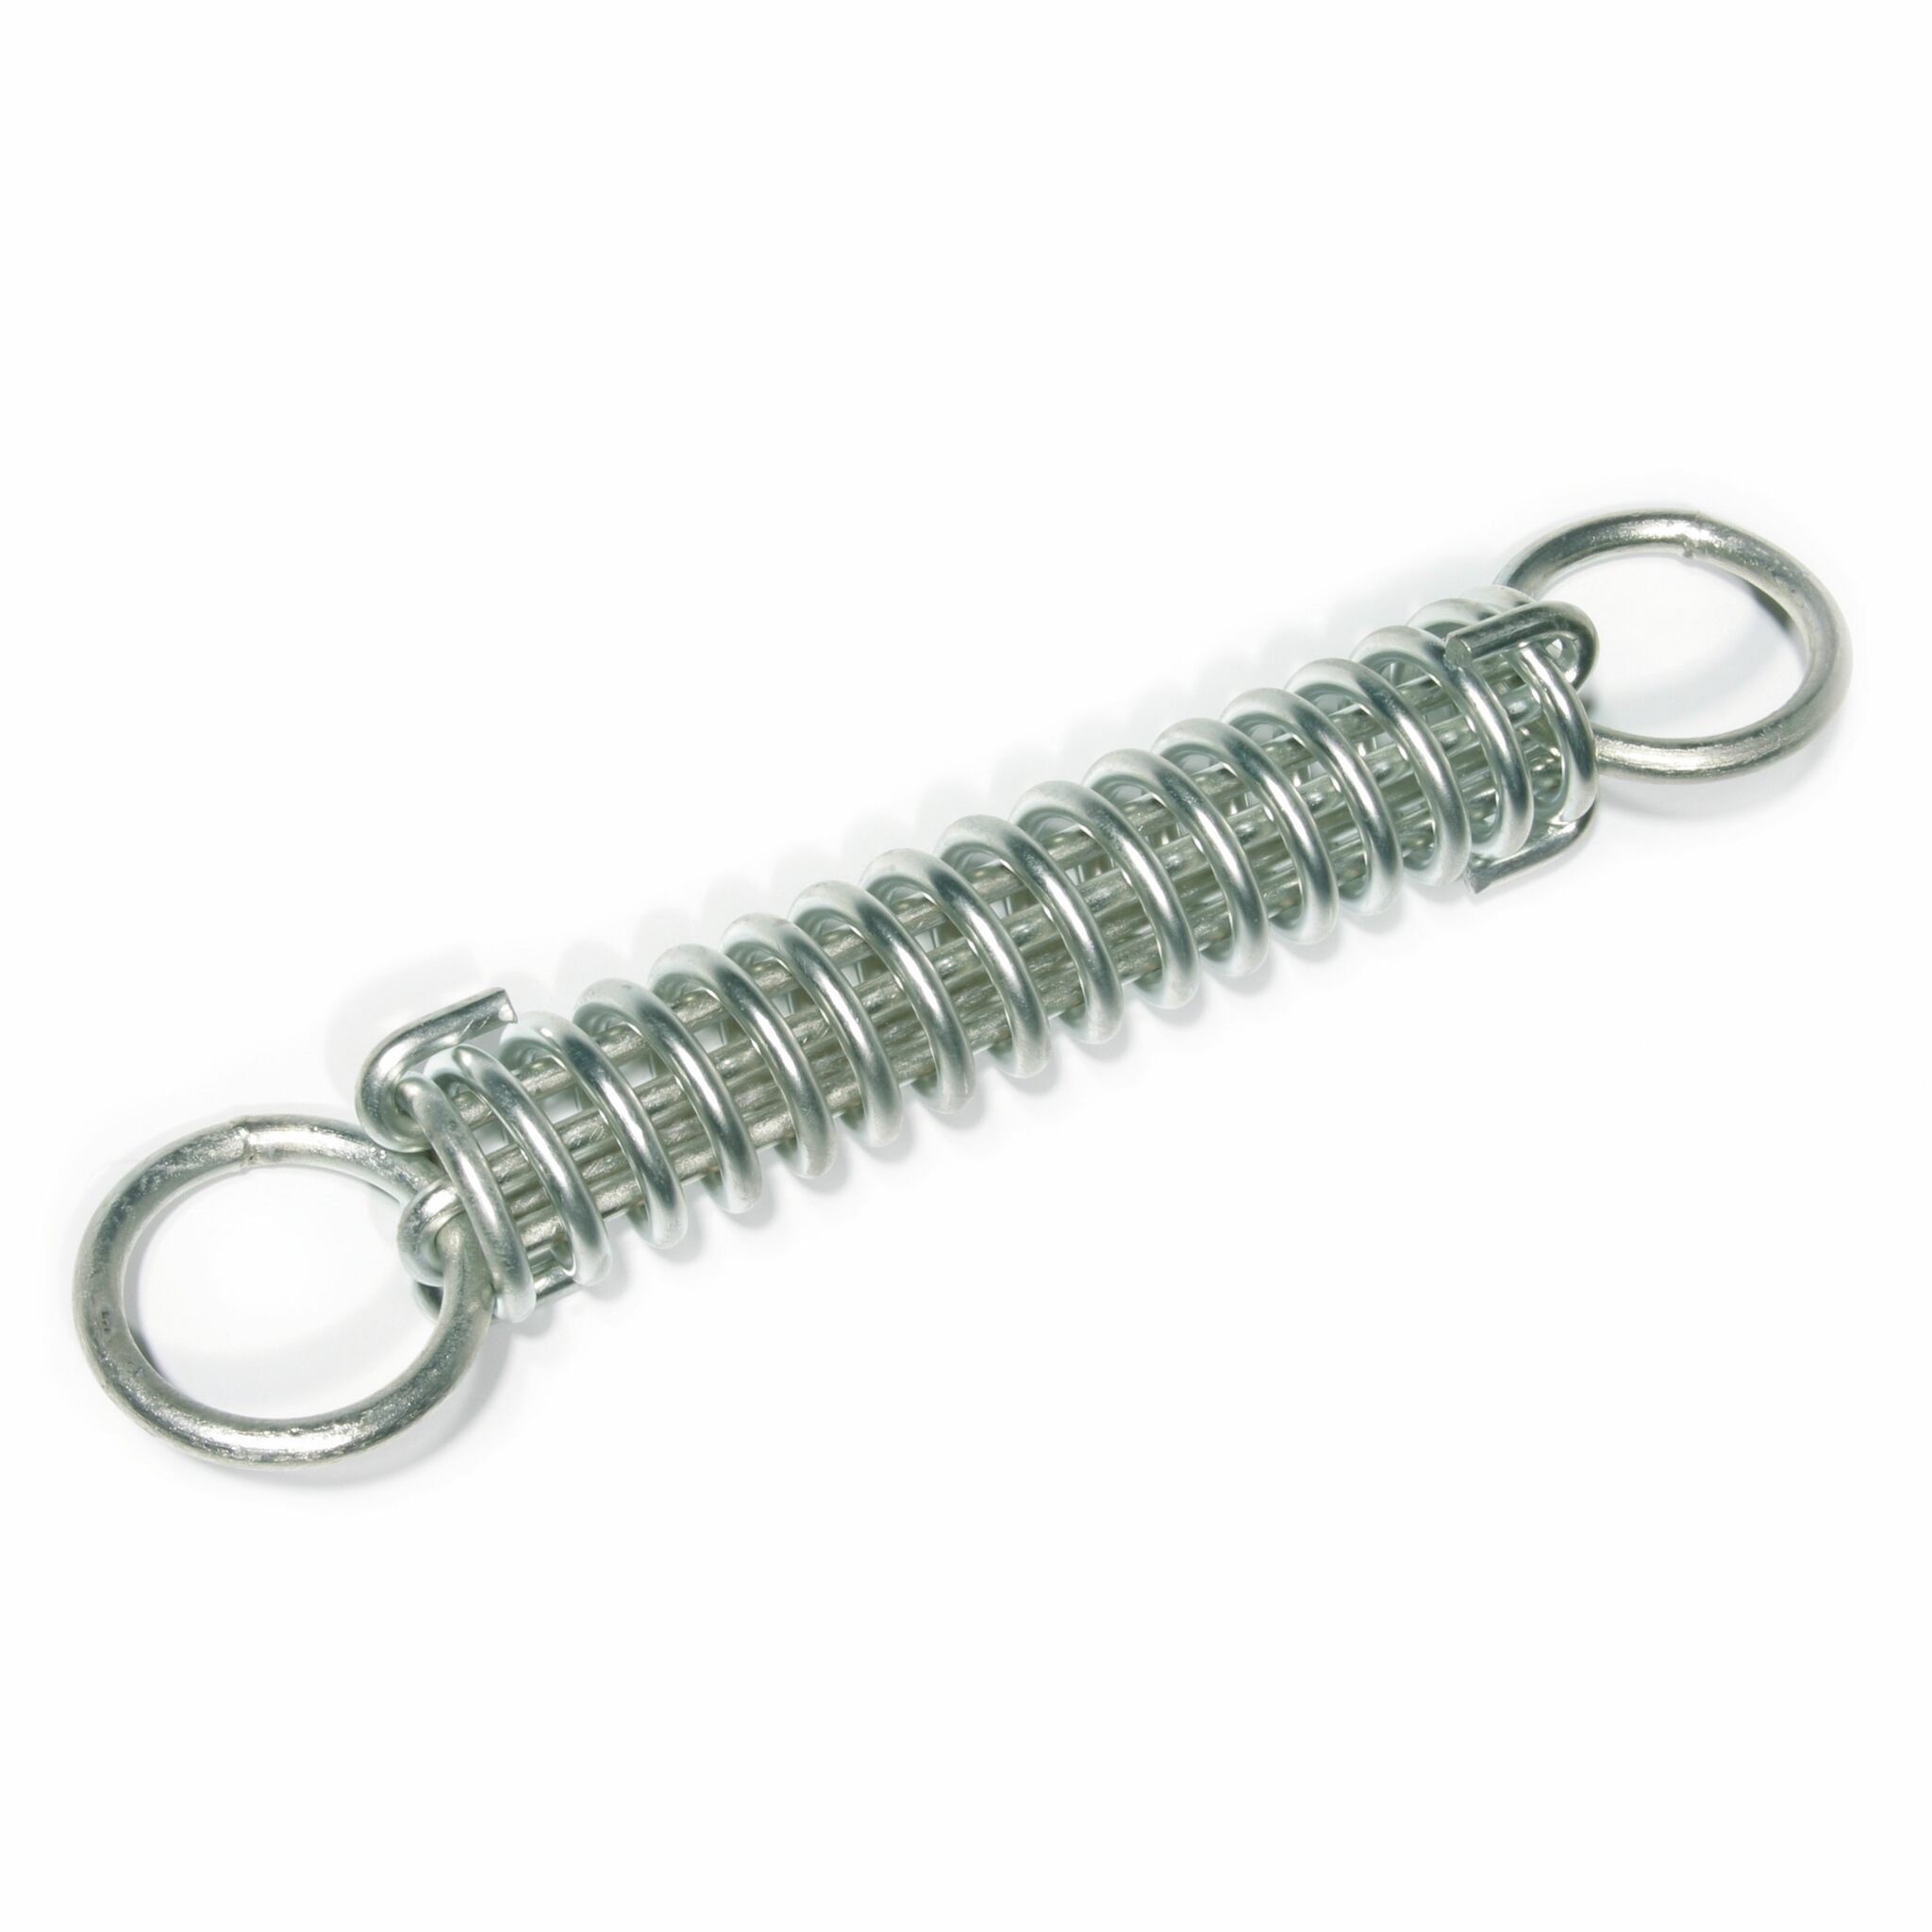 Stainless steel galvanized contact spring 5 mm